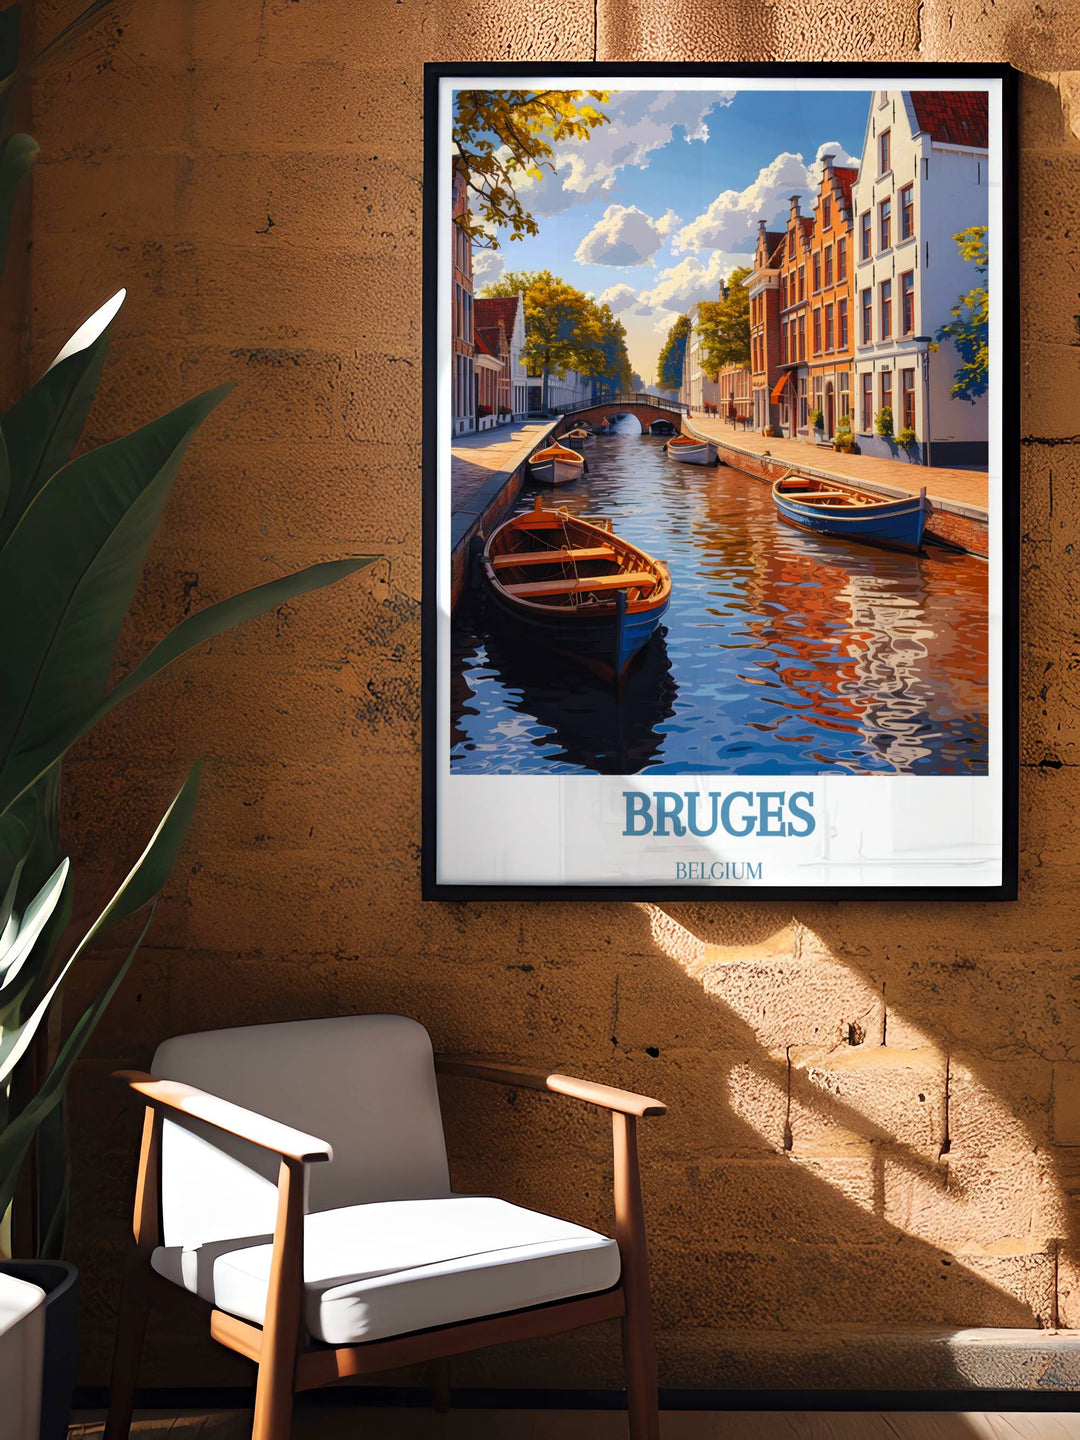 Artistic rendition of the Canal of Bruges showing vivid reflections of medieval architecture, perfect for adding historical elegance to any room